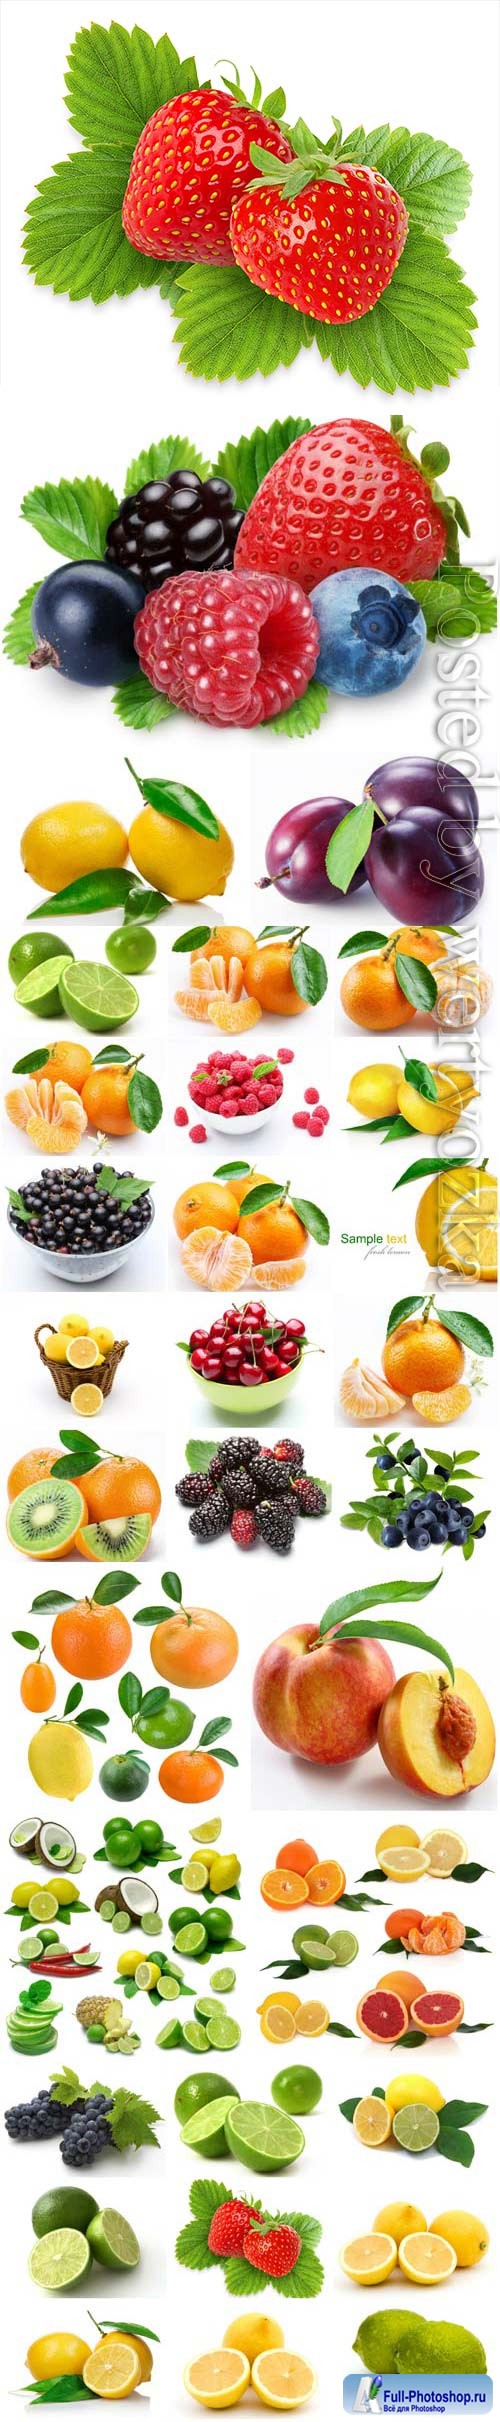 Realistic fruits and berries stock photo